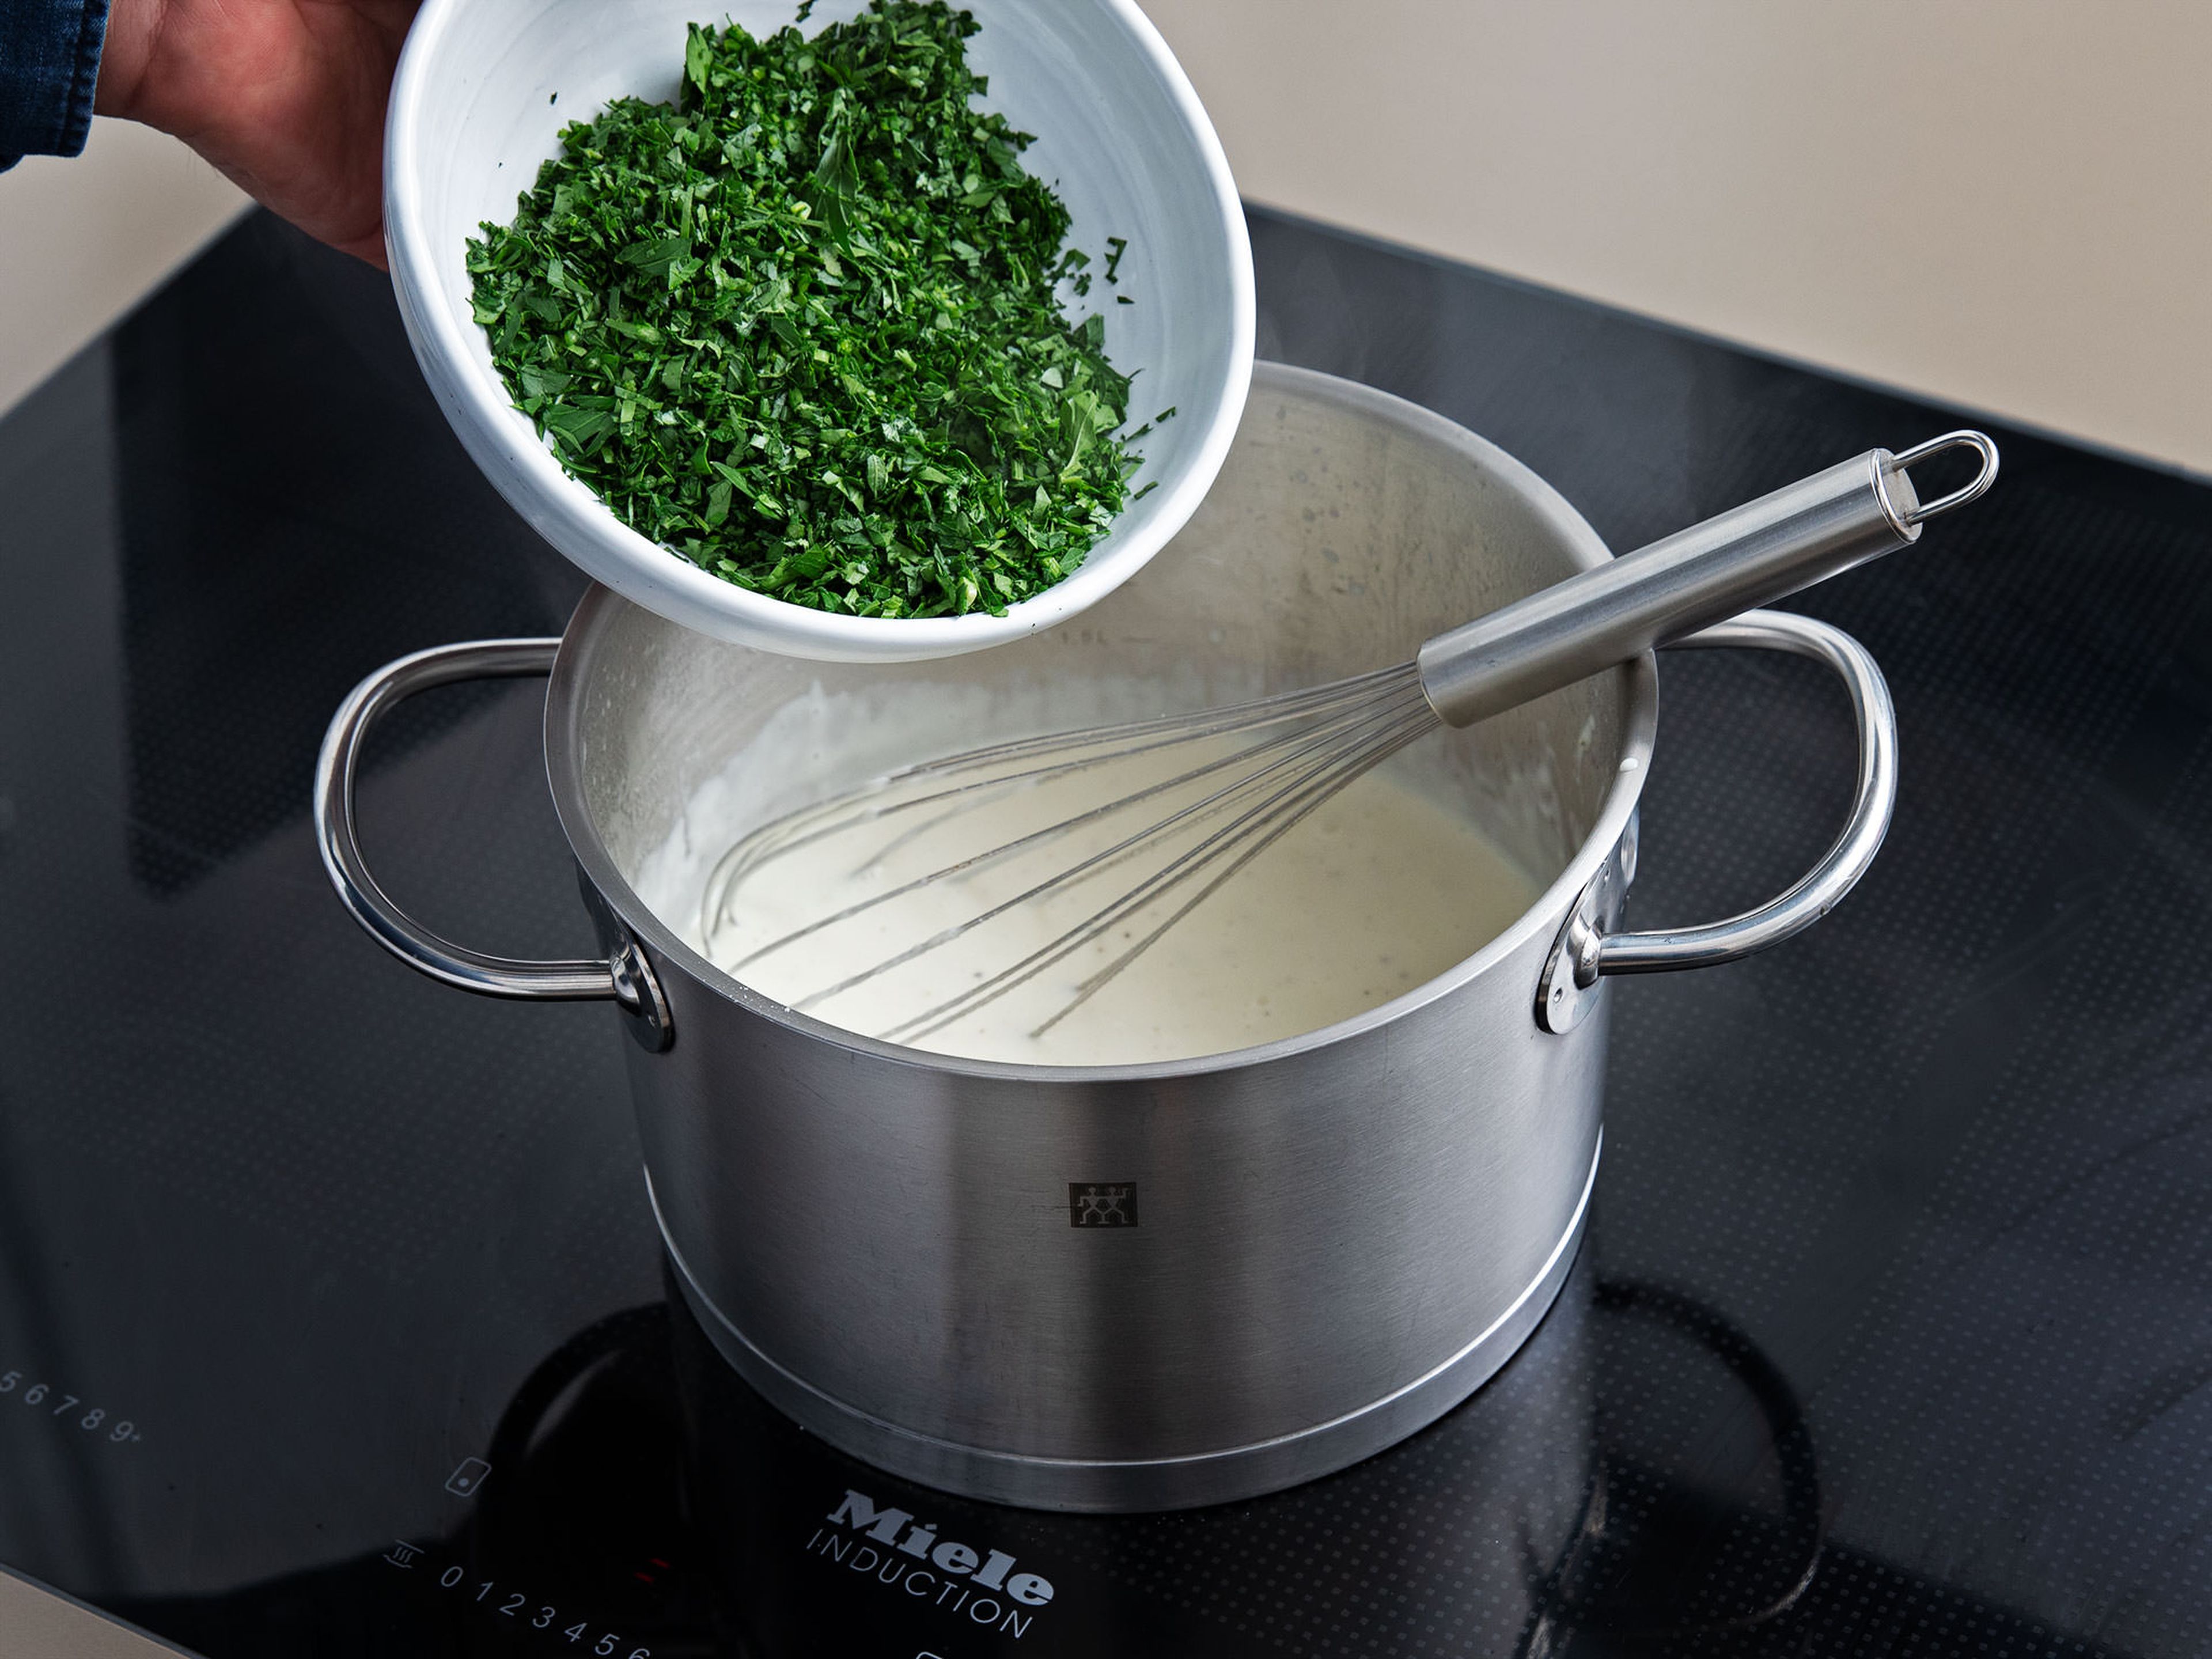 Meanwhile, melt butter in a pot over medium heat and whisk in the flour, until you get a smooth roux. Gradually whisk in the milk, season with salt and pepper, and add cream. Once thick and smooth, add parsley.